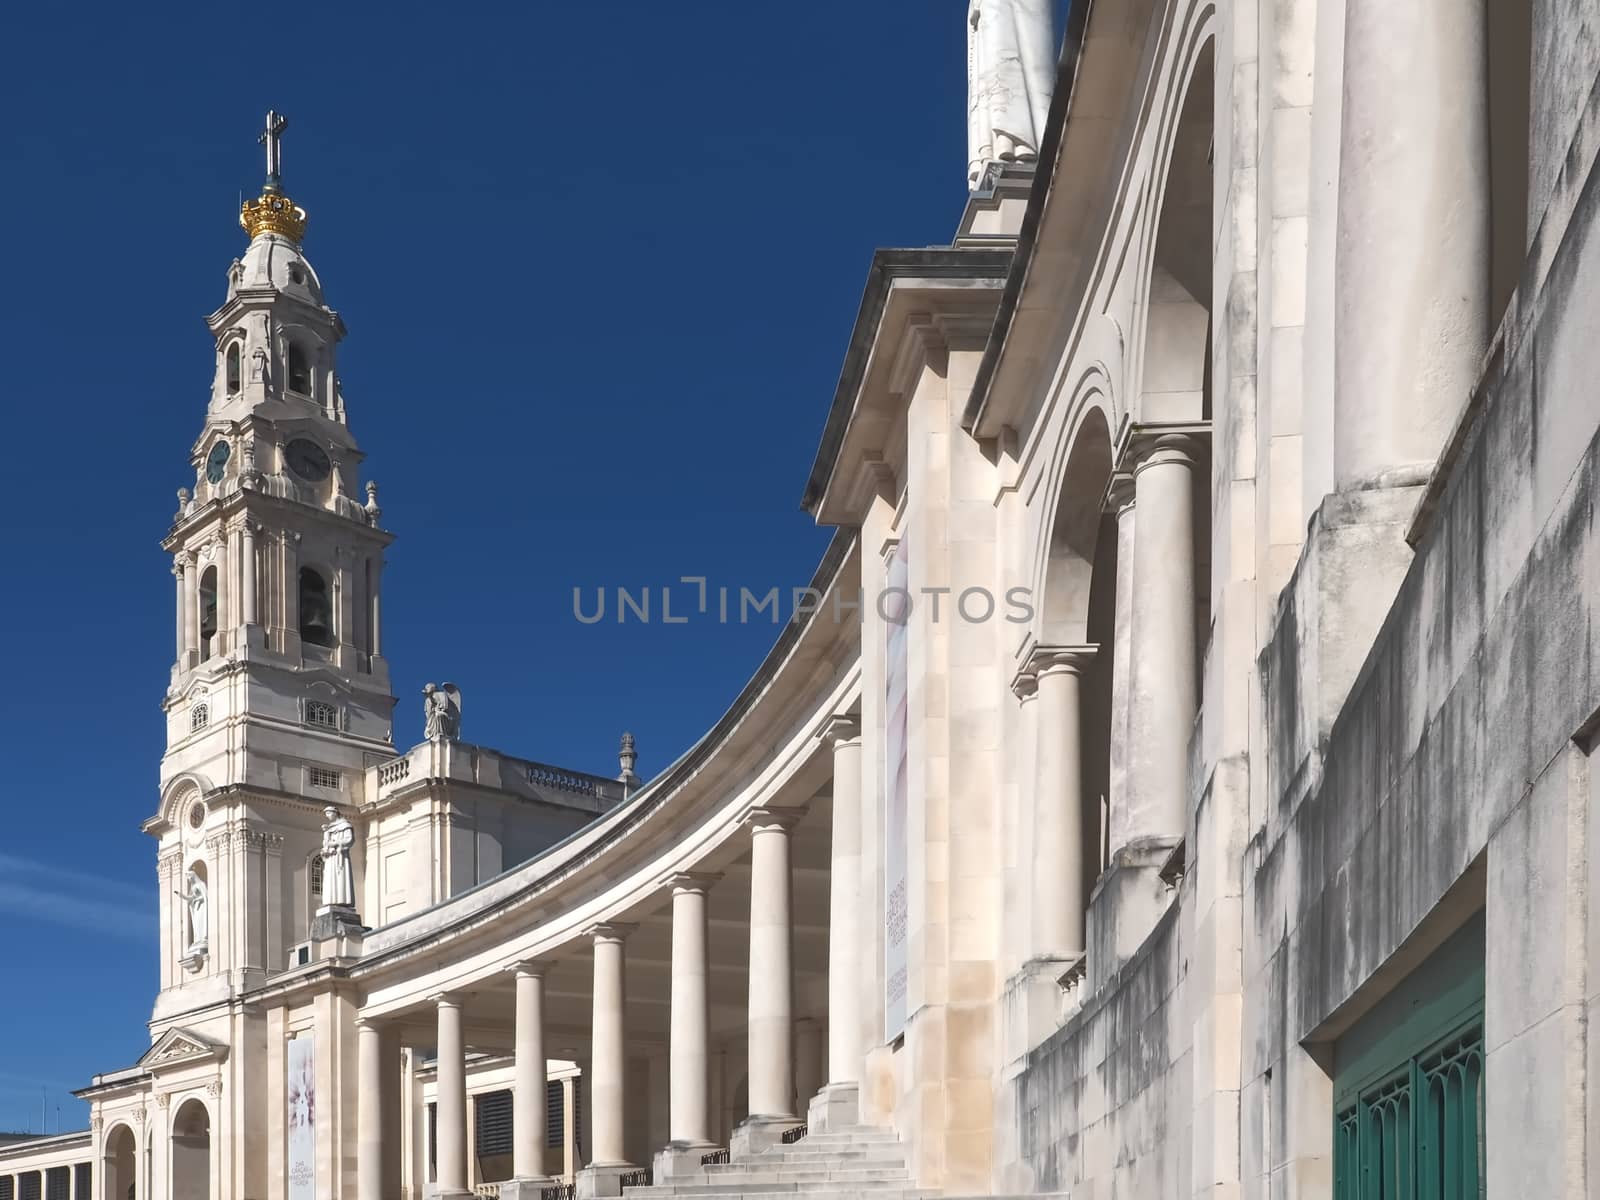 Cathedral of Fatima in Portugal near Lisboa with blue sky by Stimmungsbilder